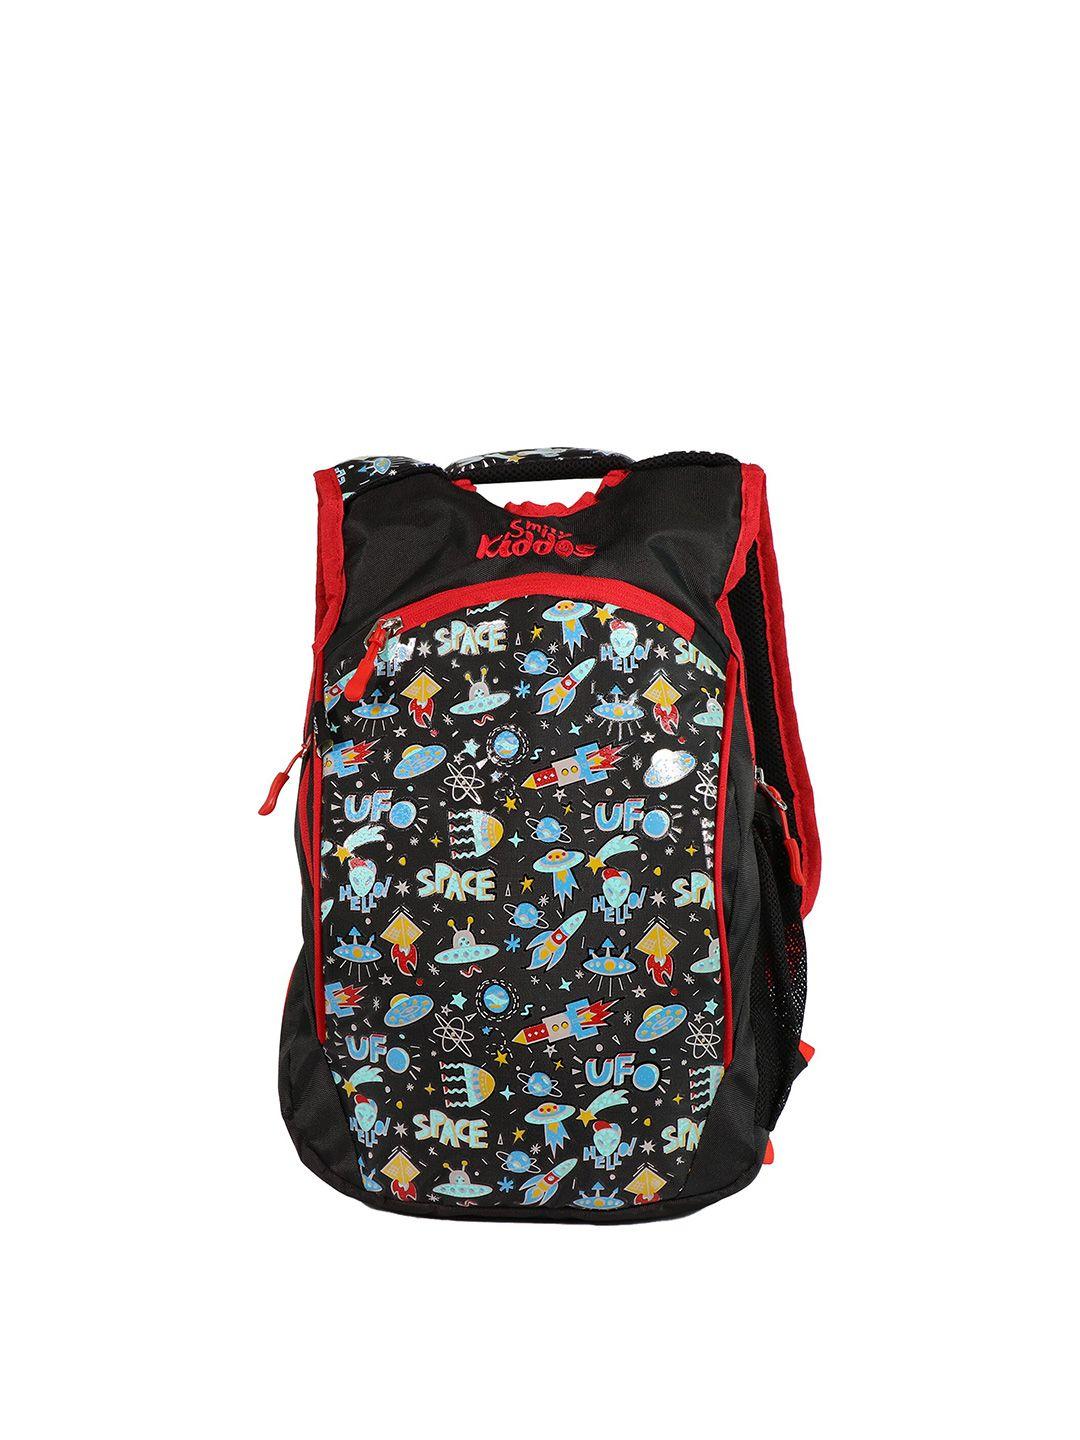 smily kiddos unisex kids black & red graphic backpack with anti-theft